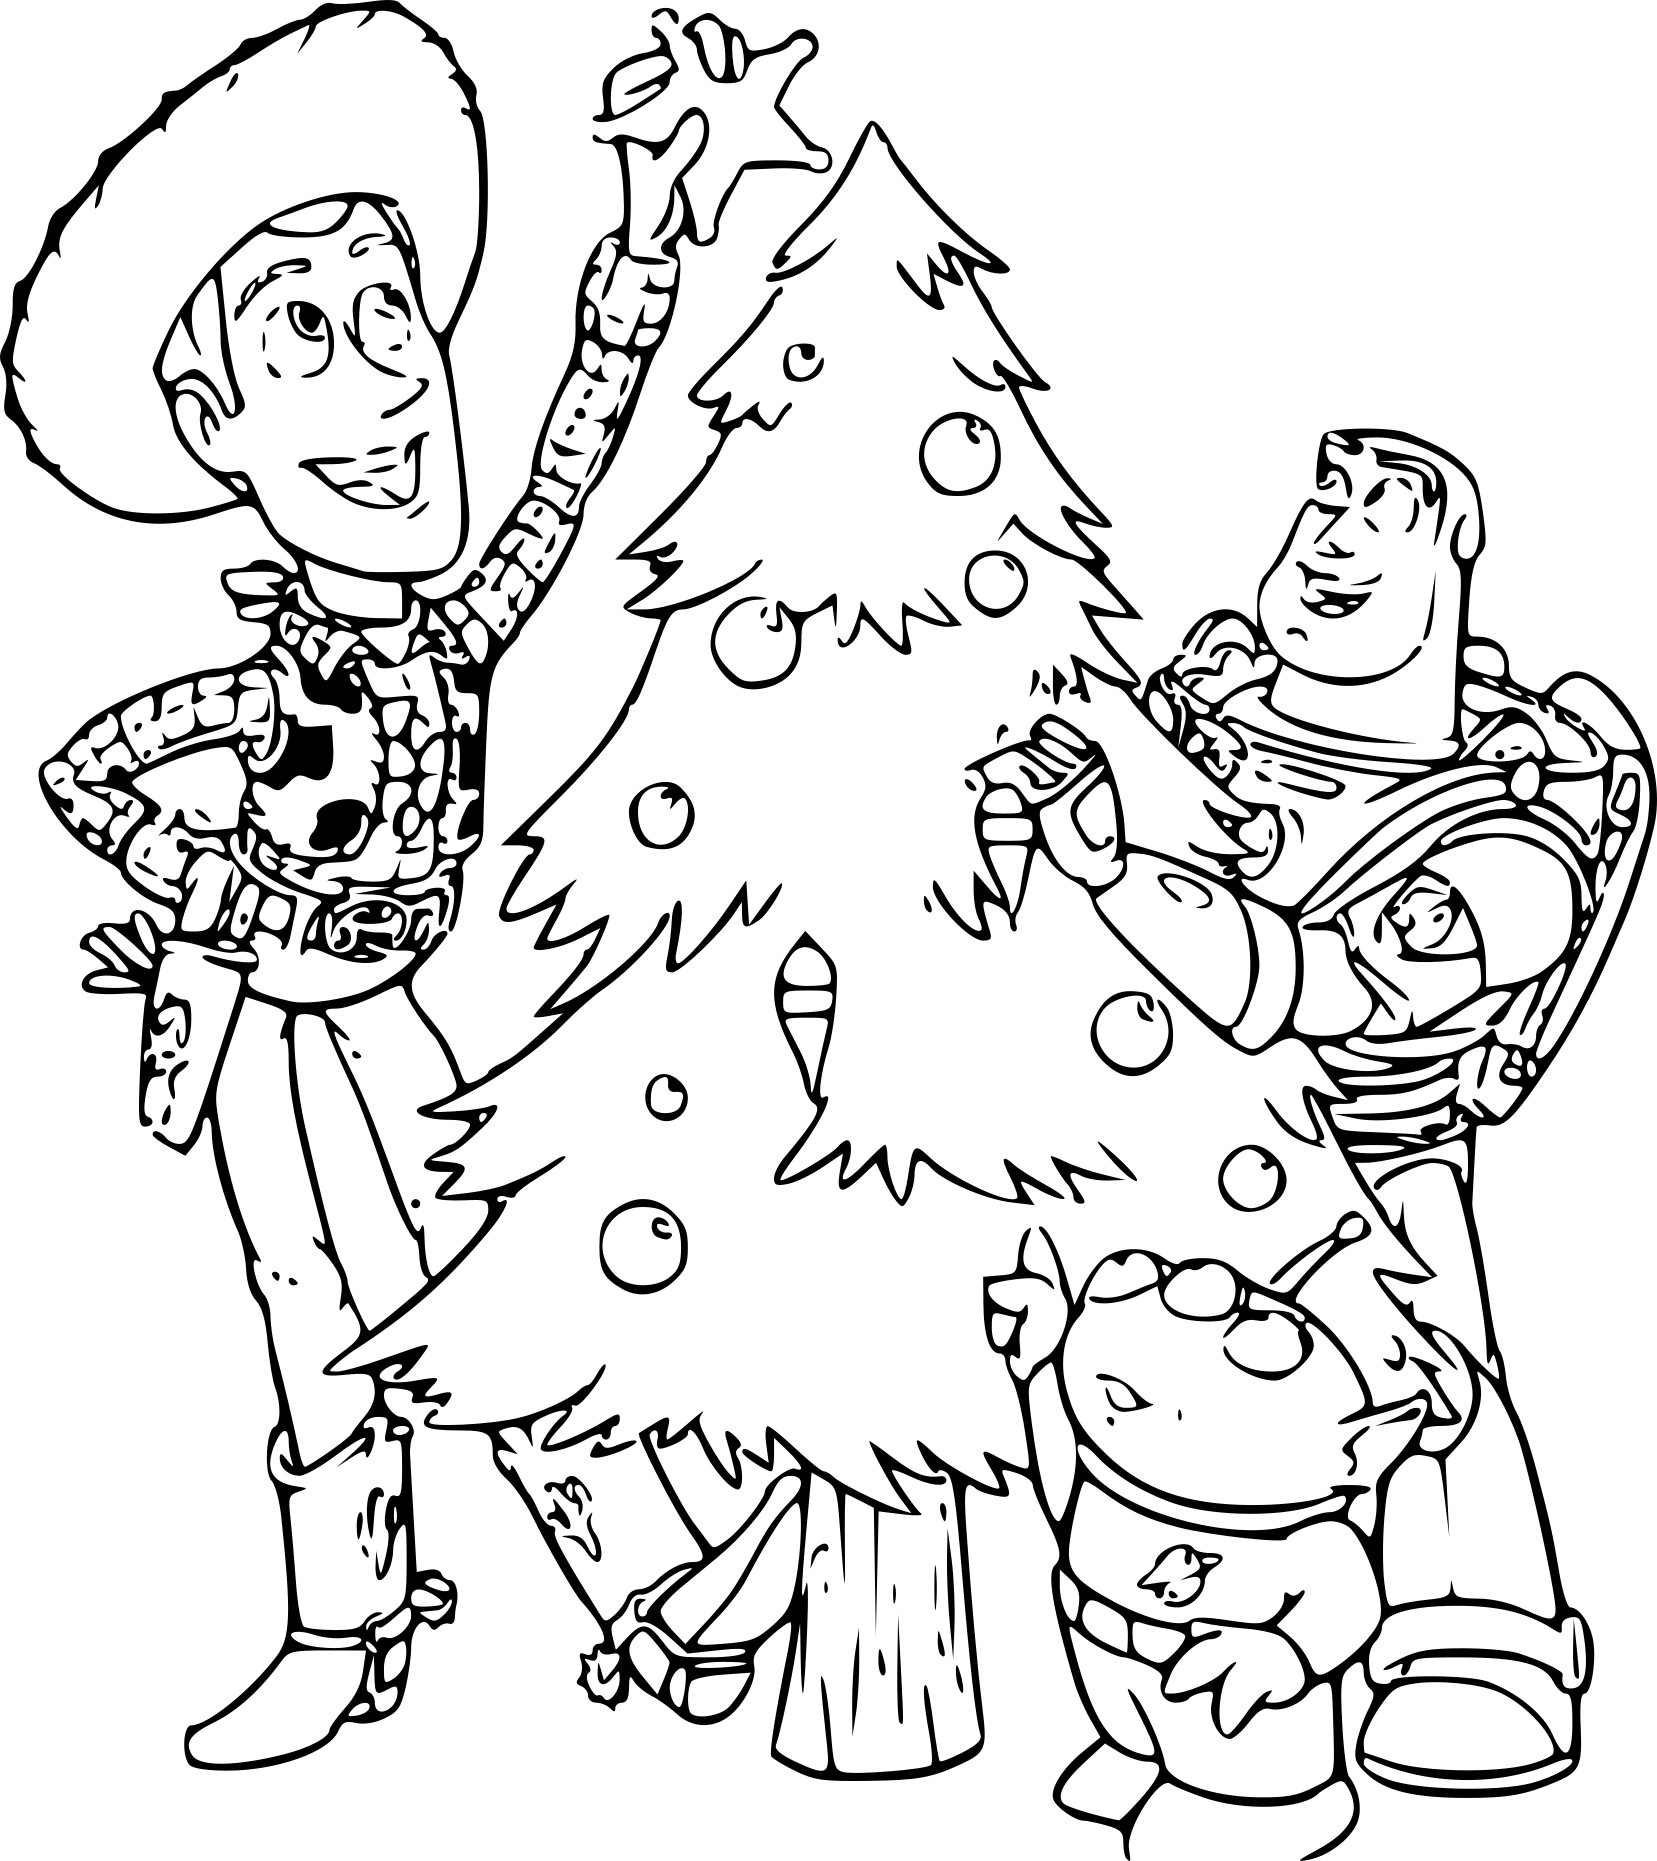 Toy Story Christmas coloring page